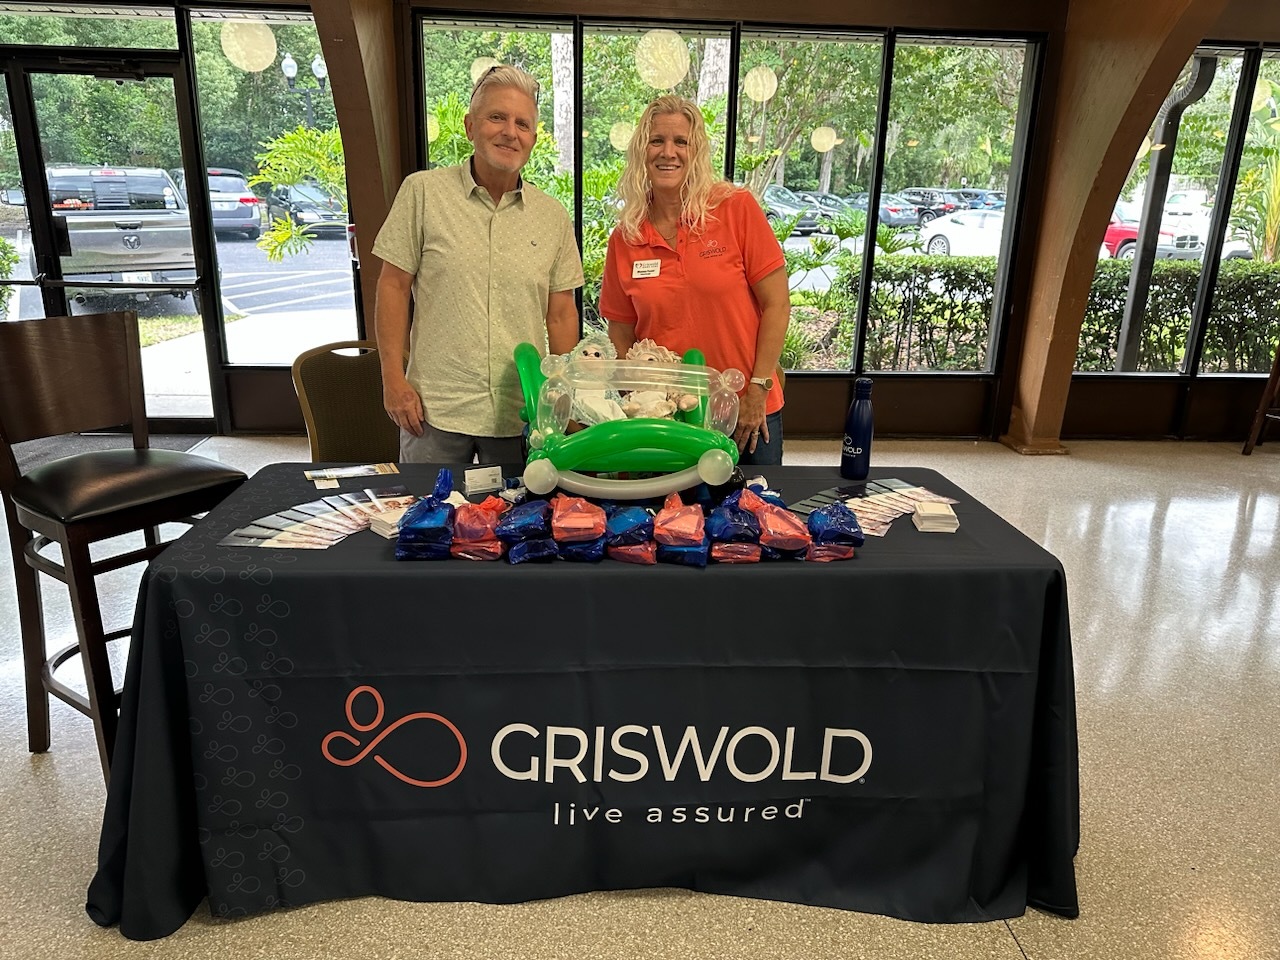 Griswold Care Pairing image